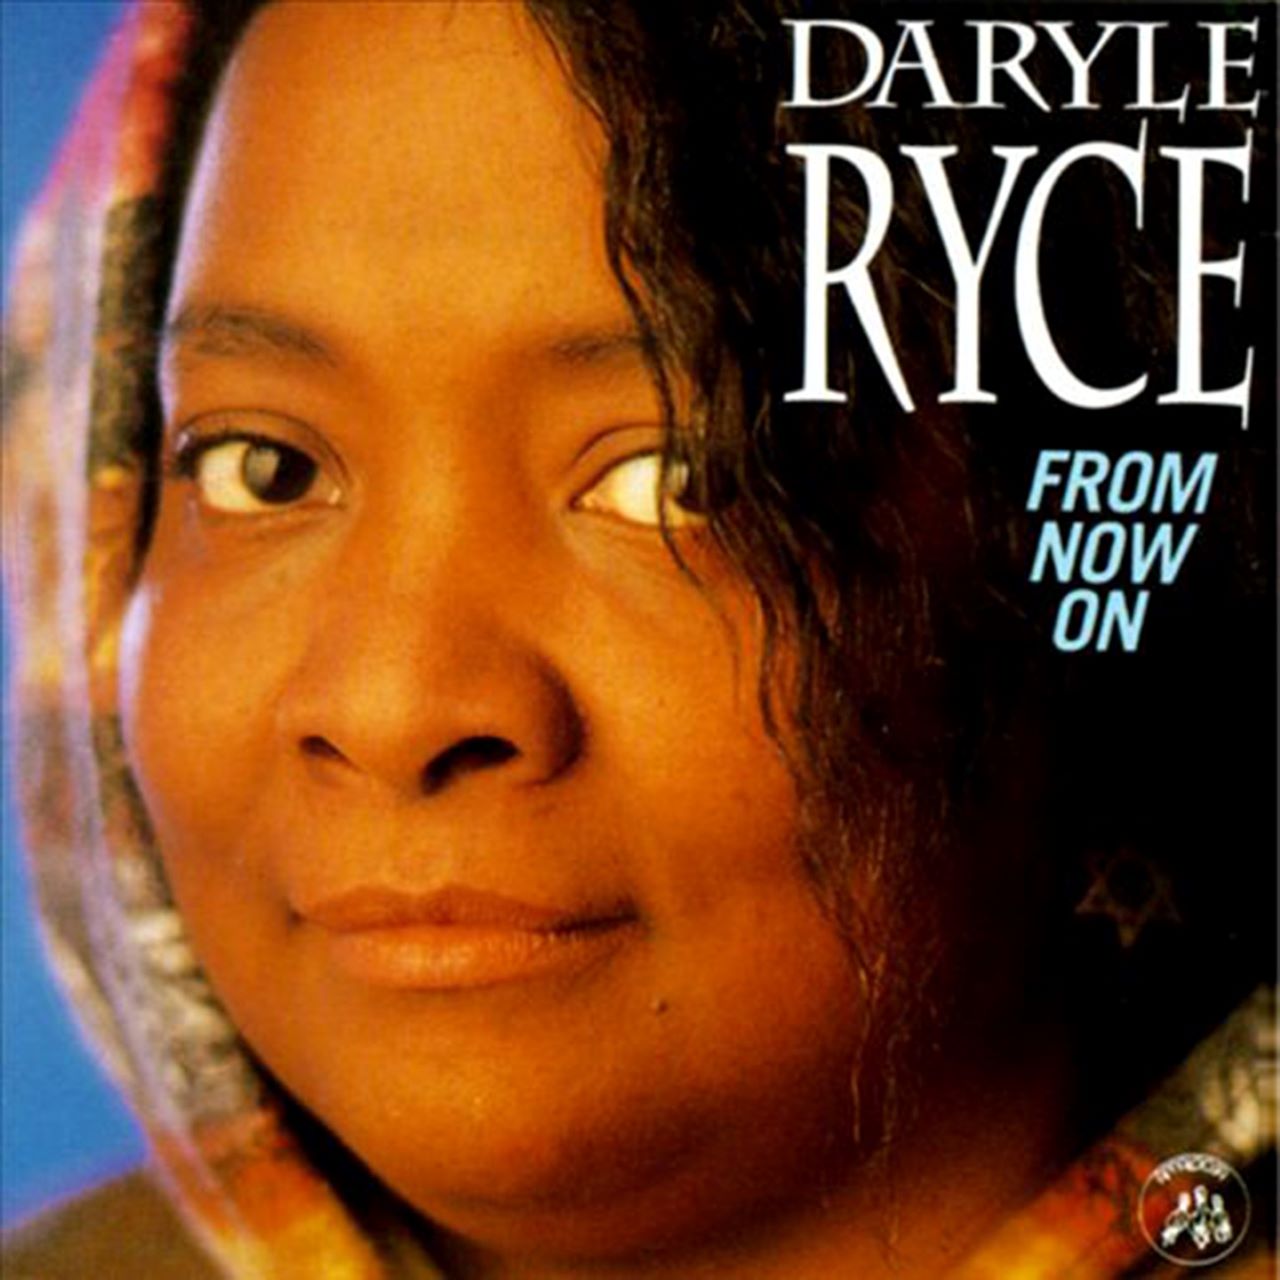 Daryle Ryce – From Now On cover album